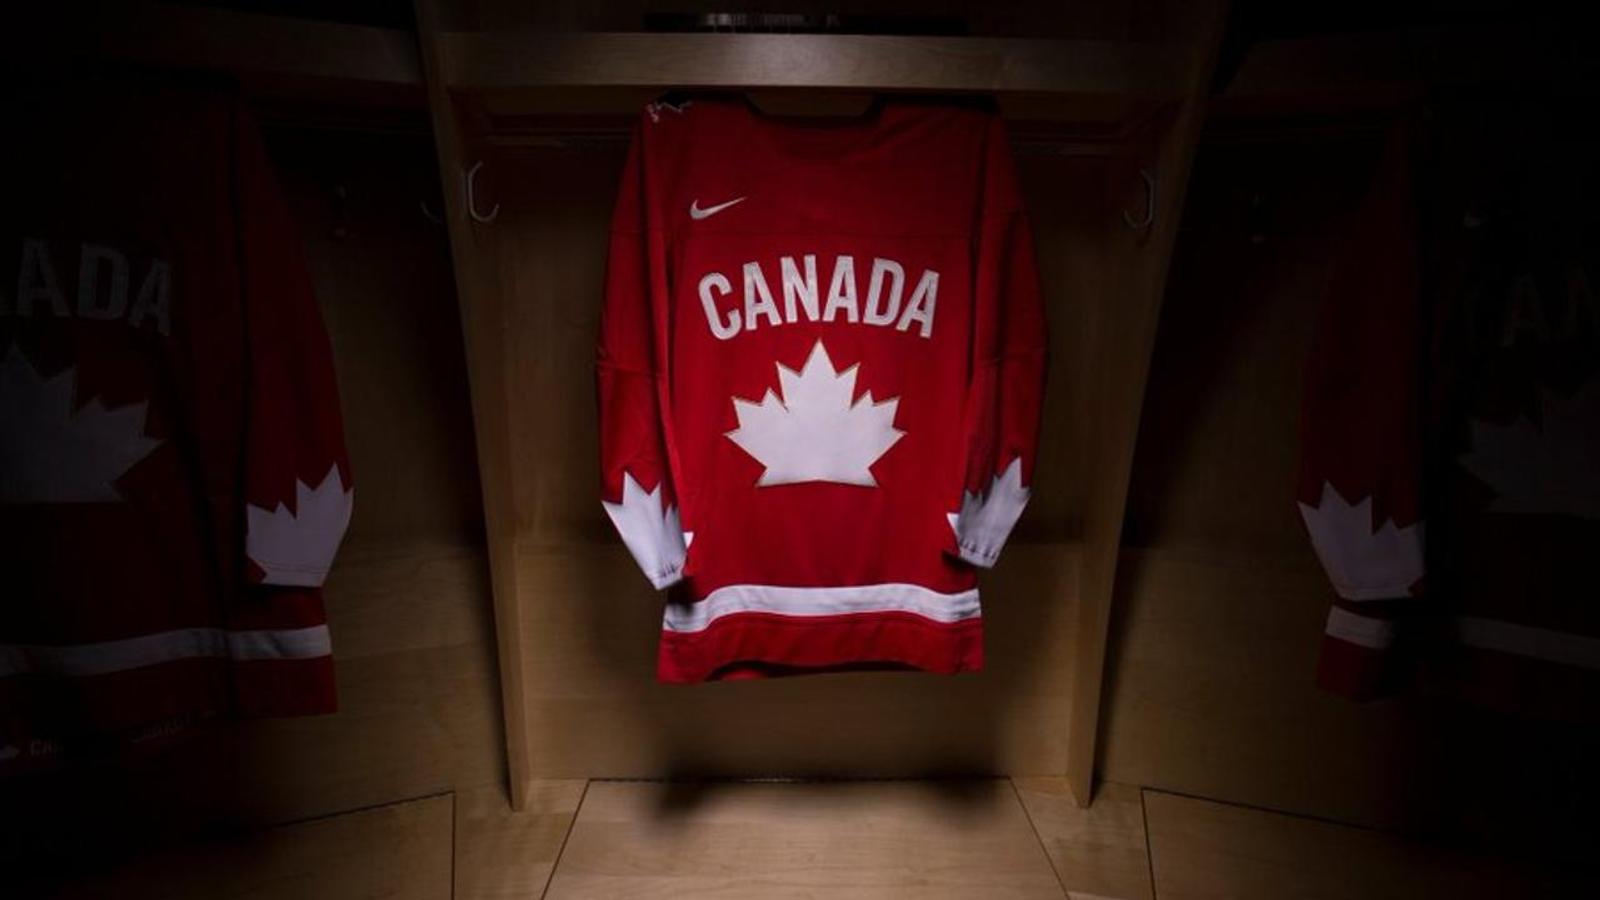 TEAM CANADA: “5 players” will face NHL suspensions for involvement in the 2018 sexual assault scandal